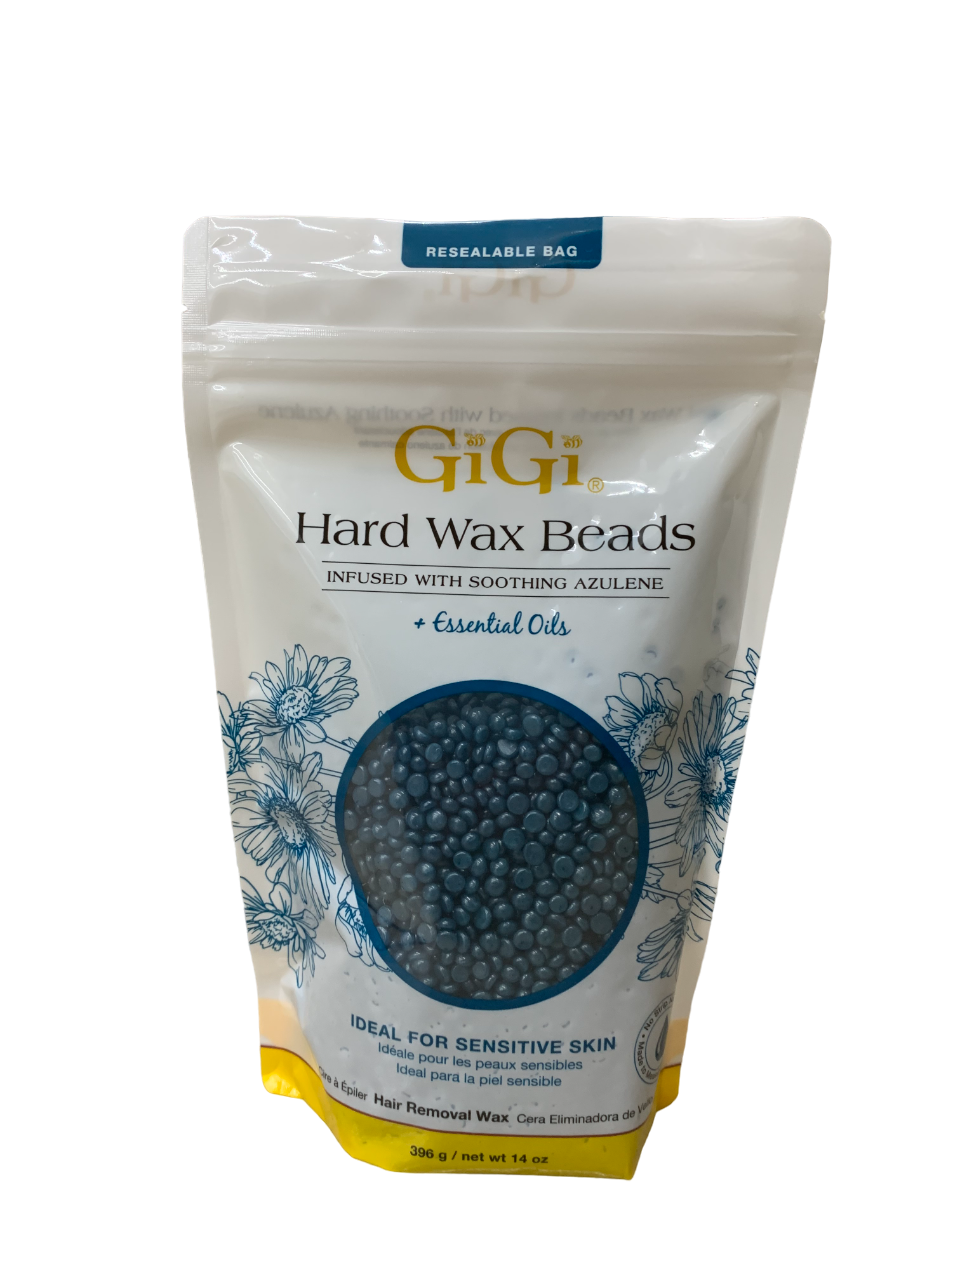 GiGi Hard Wax Beads Infused With Soothing Azulene With Essential Oil